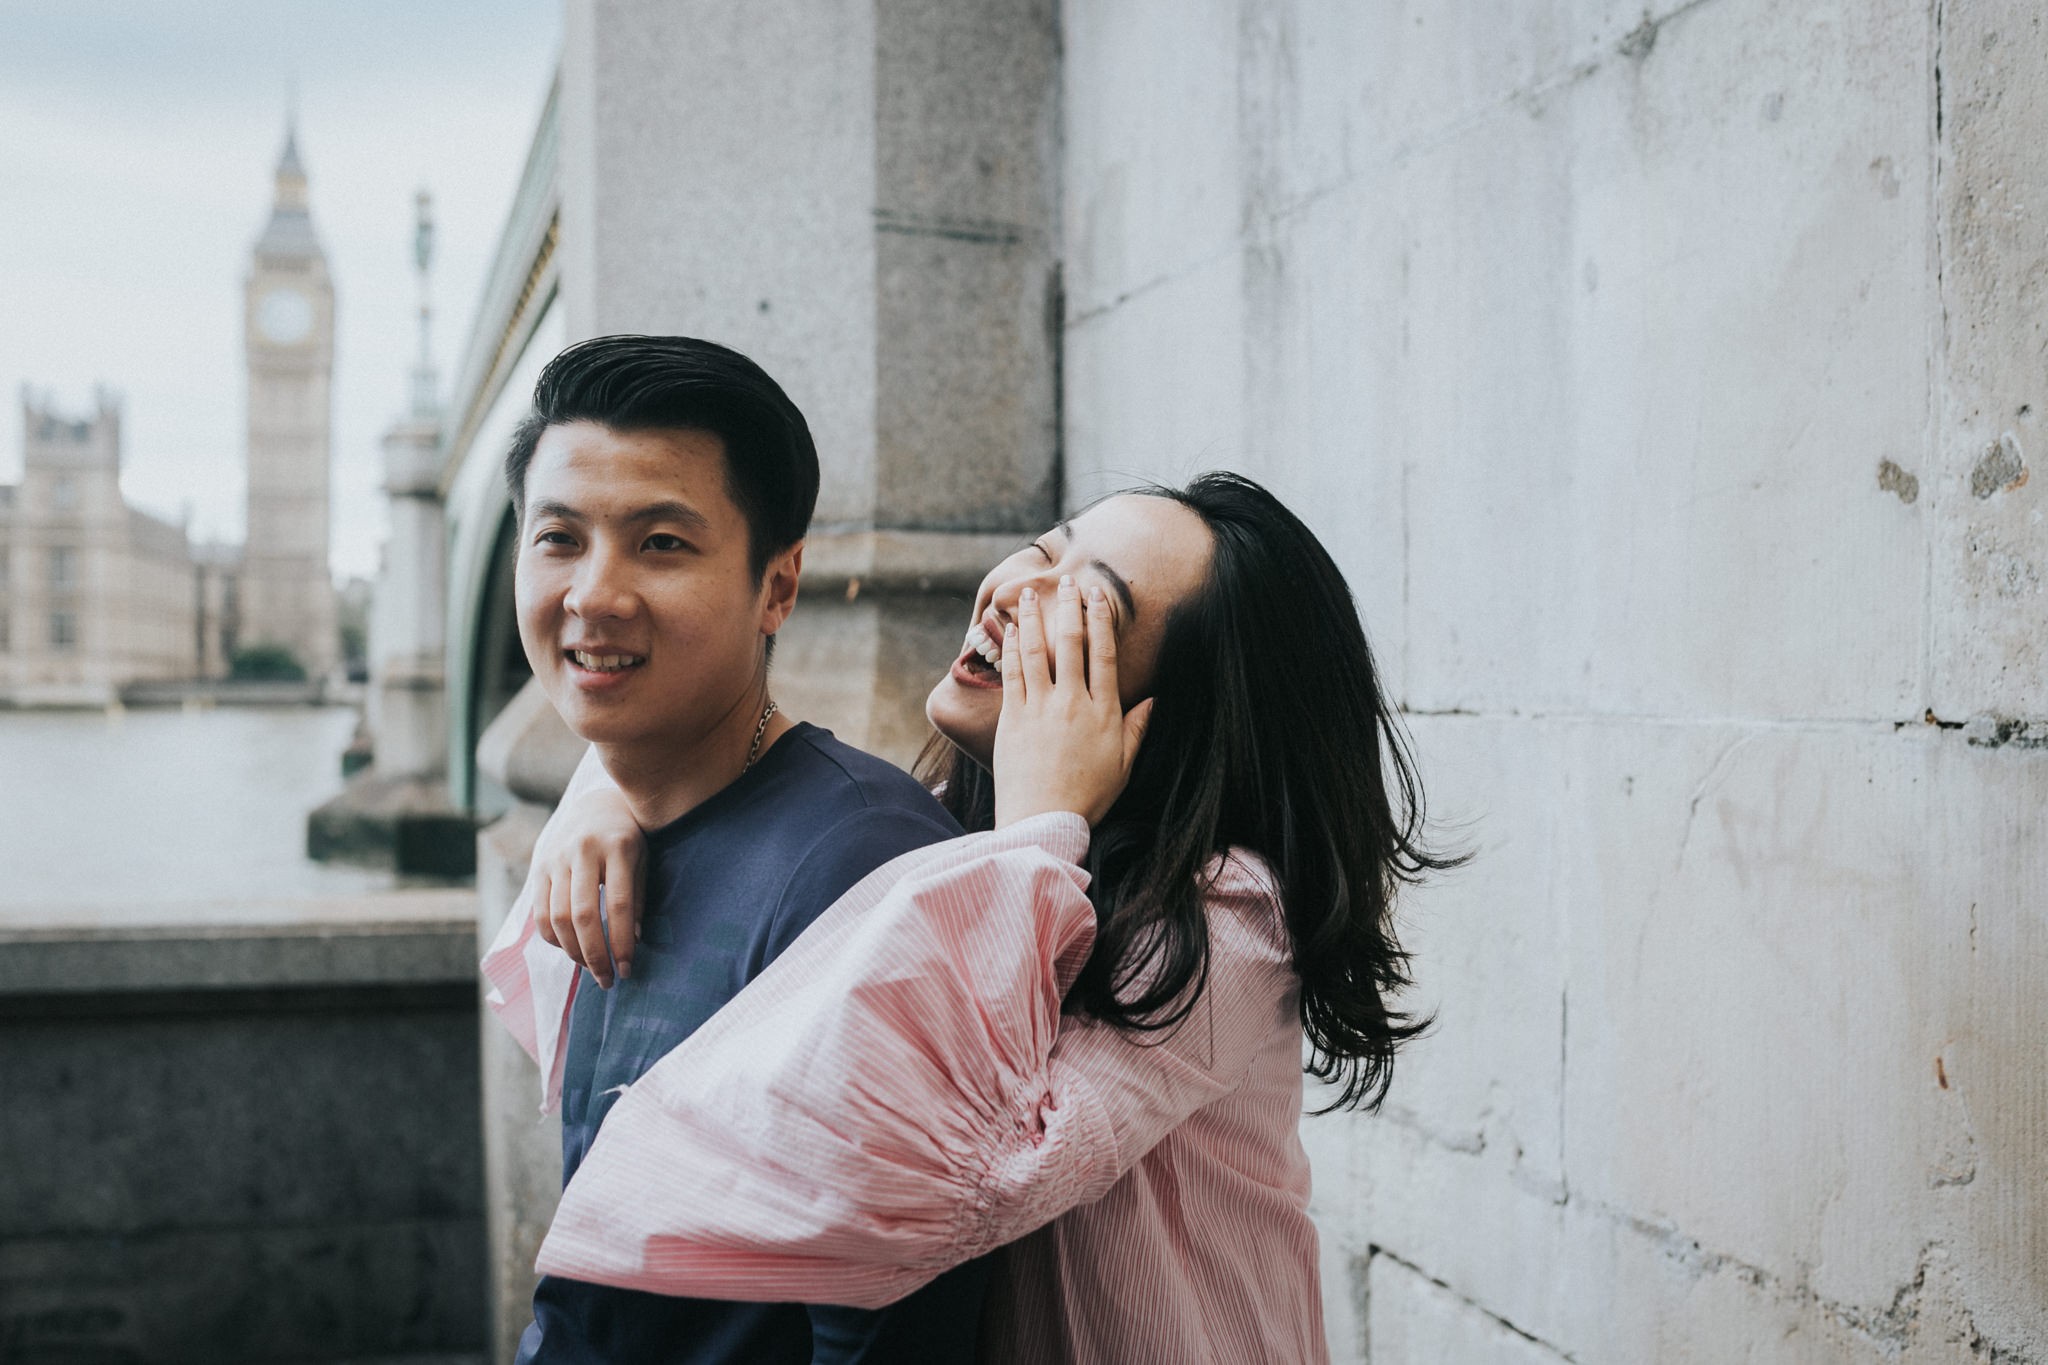 fun engagement shoot ideas in london pre wedding at wesminster soho and south bank